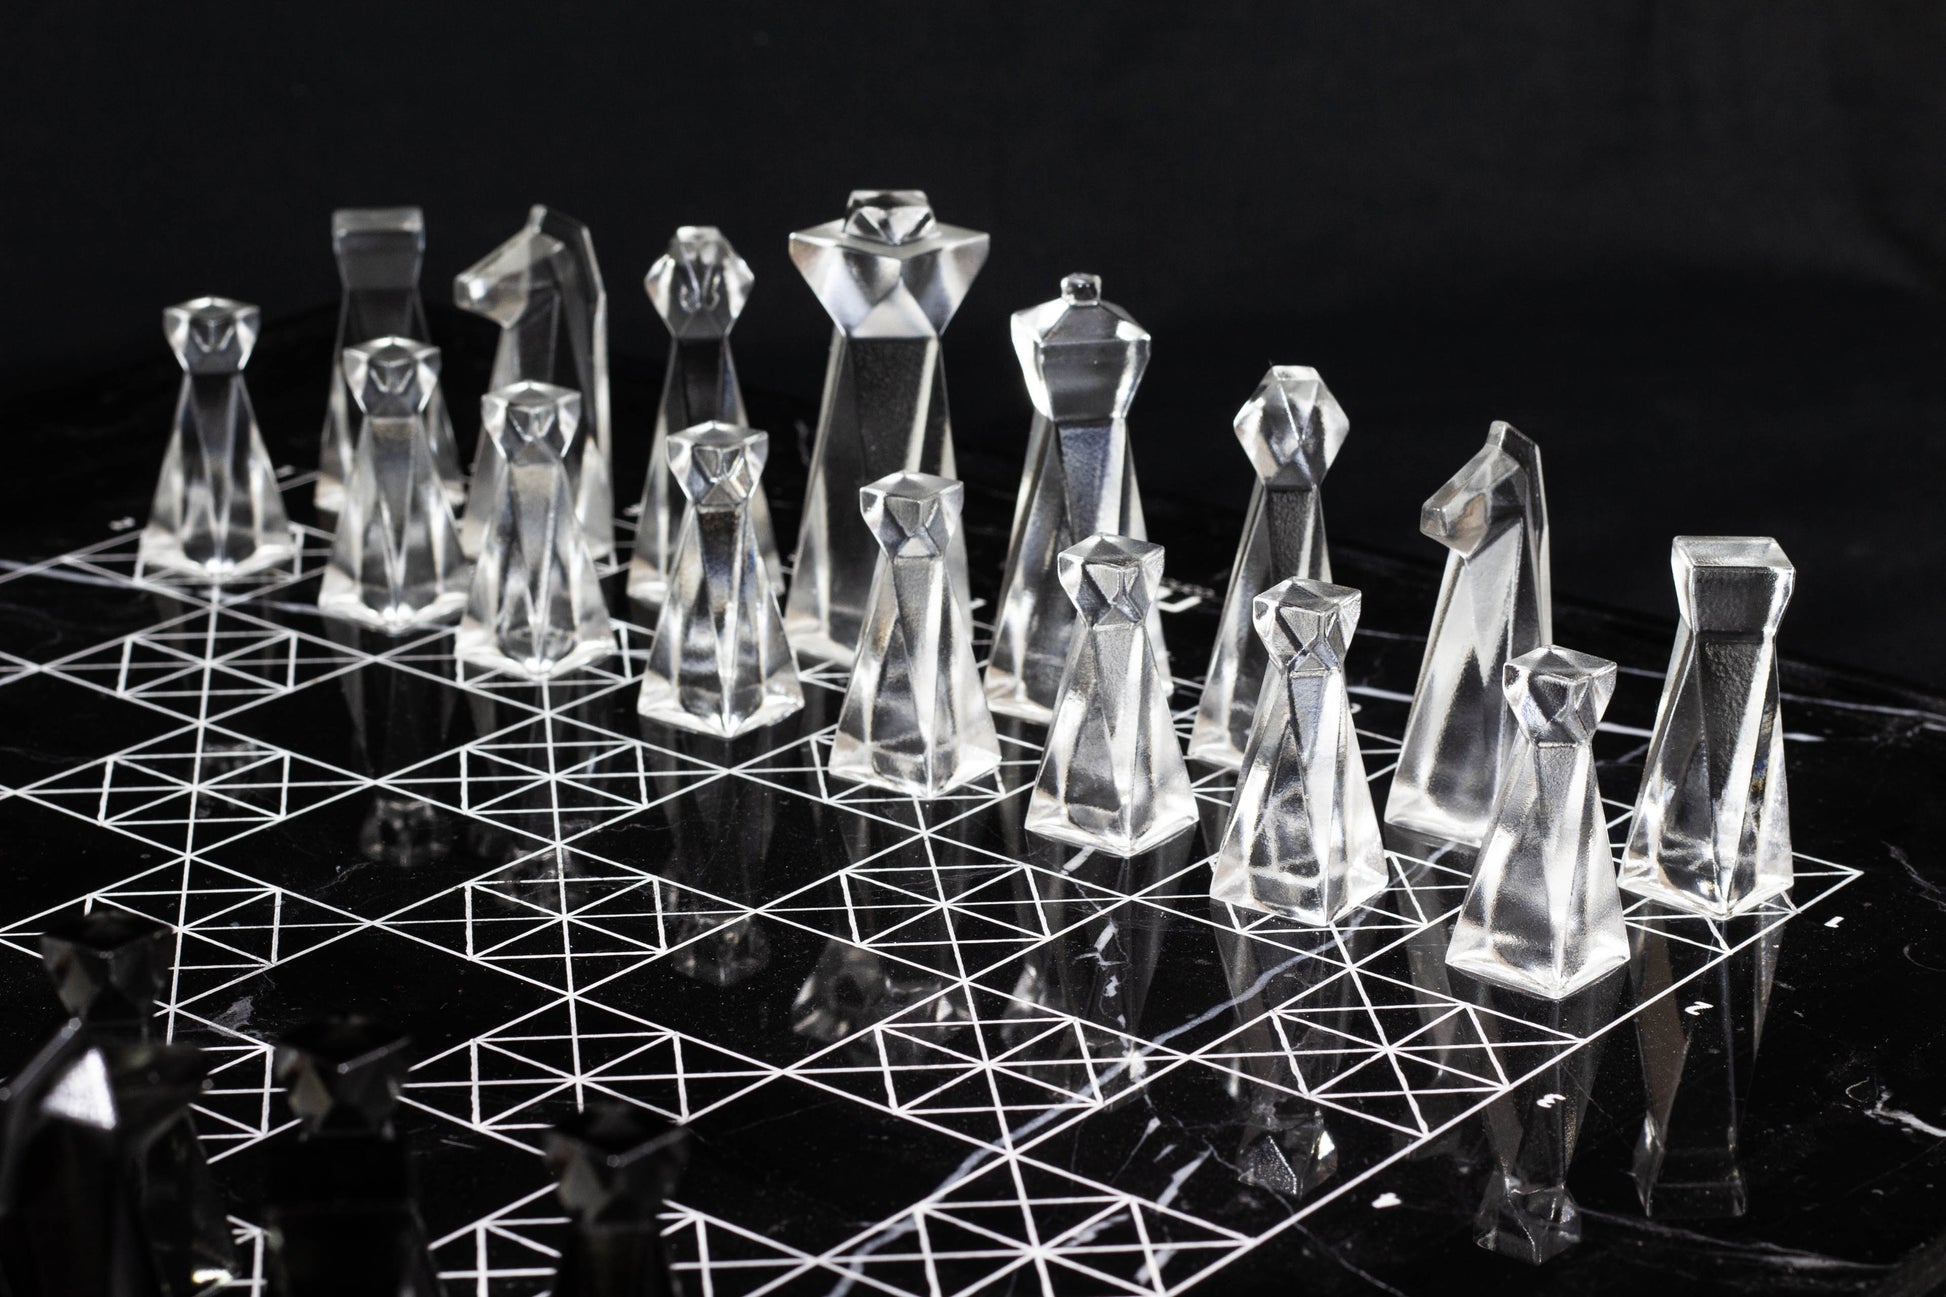 Modern Chess Set, Resin Chess Pieces with Marble Board, Handmade Unique Chess Set with Board, Luxury Personalized Gift, Custom Chess Pieces